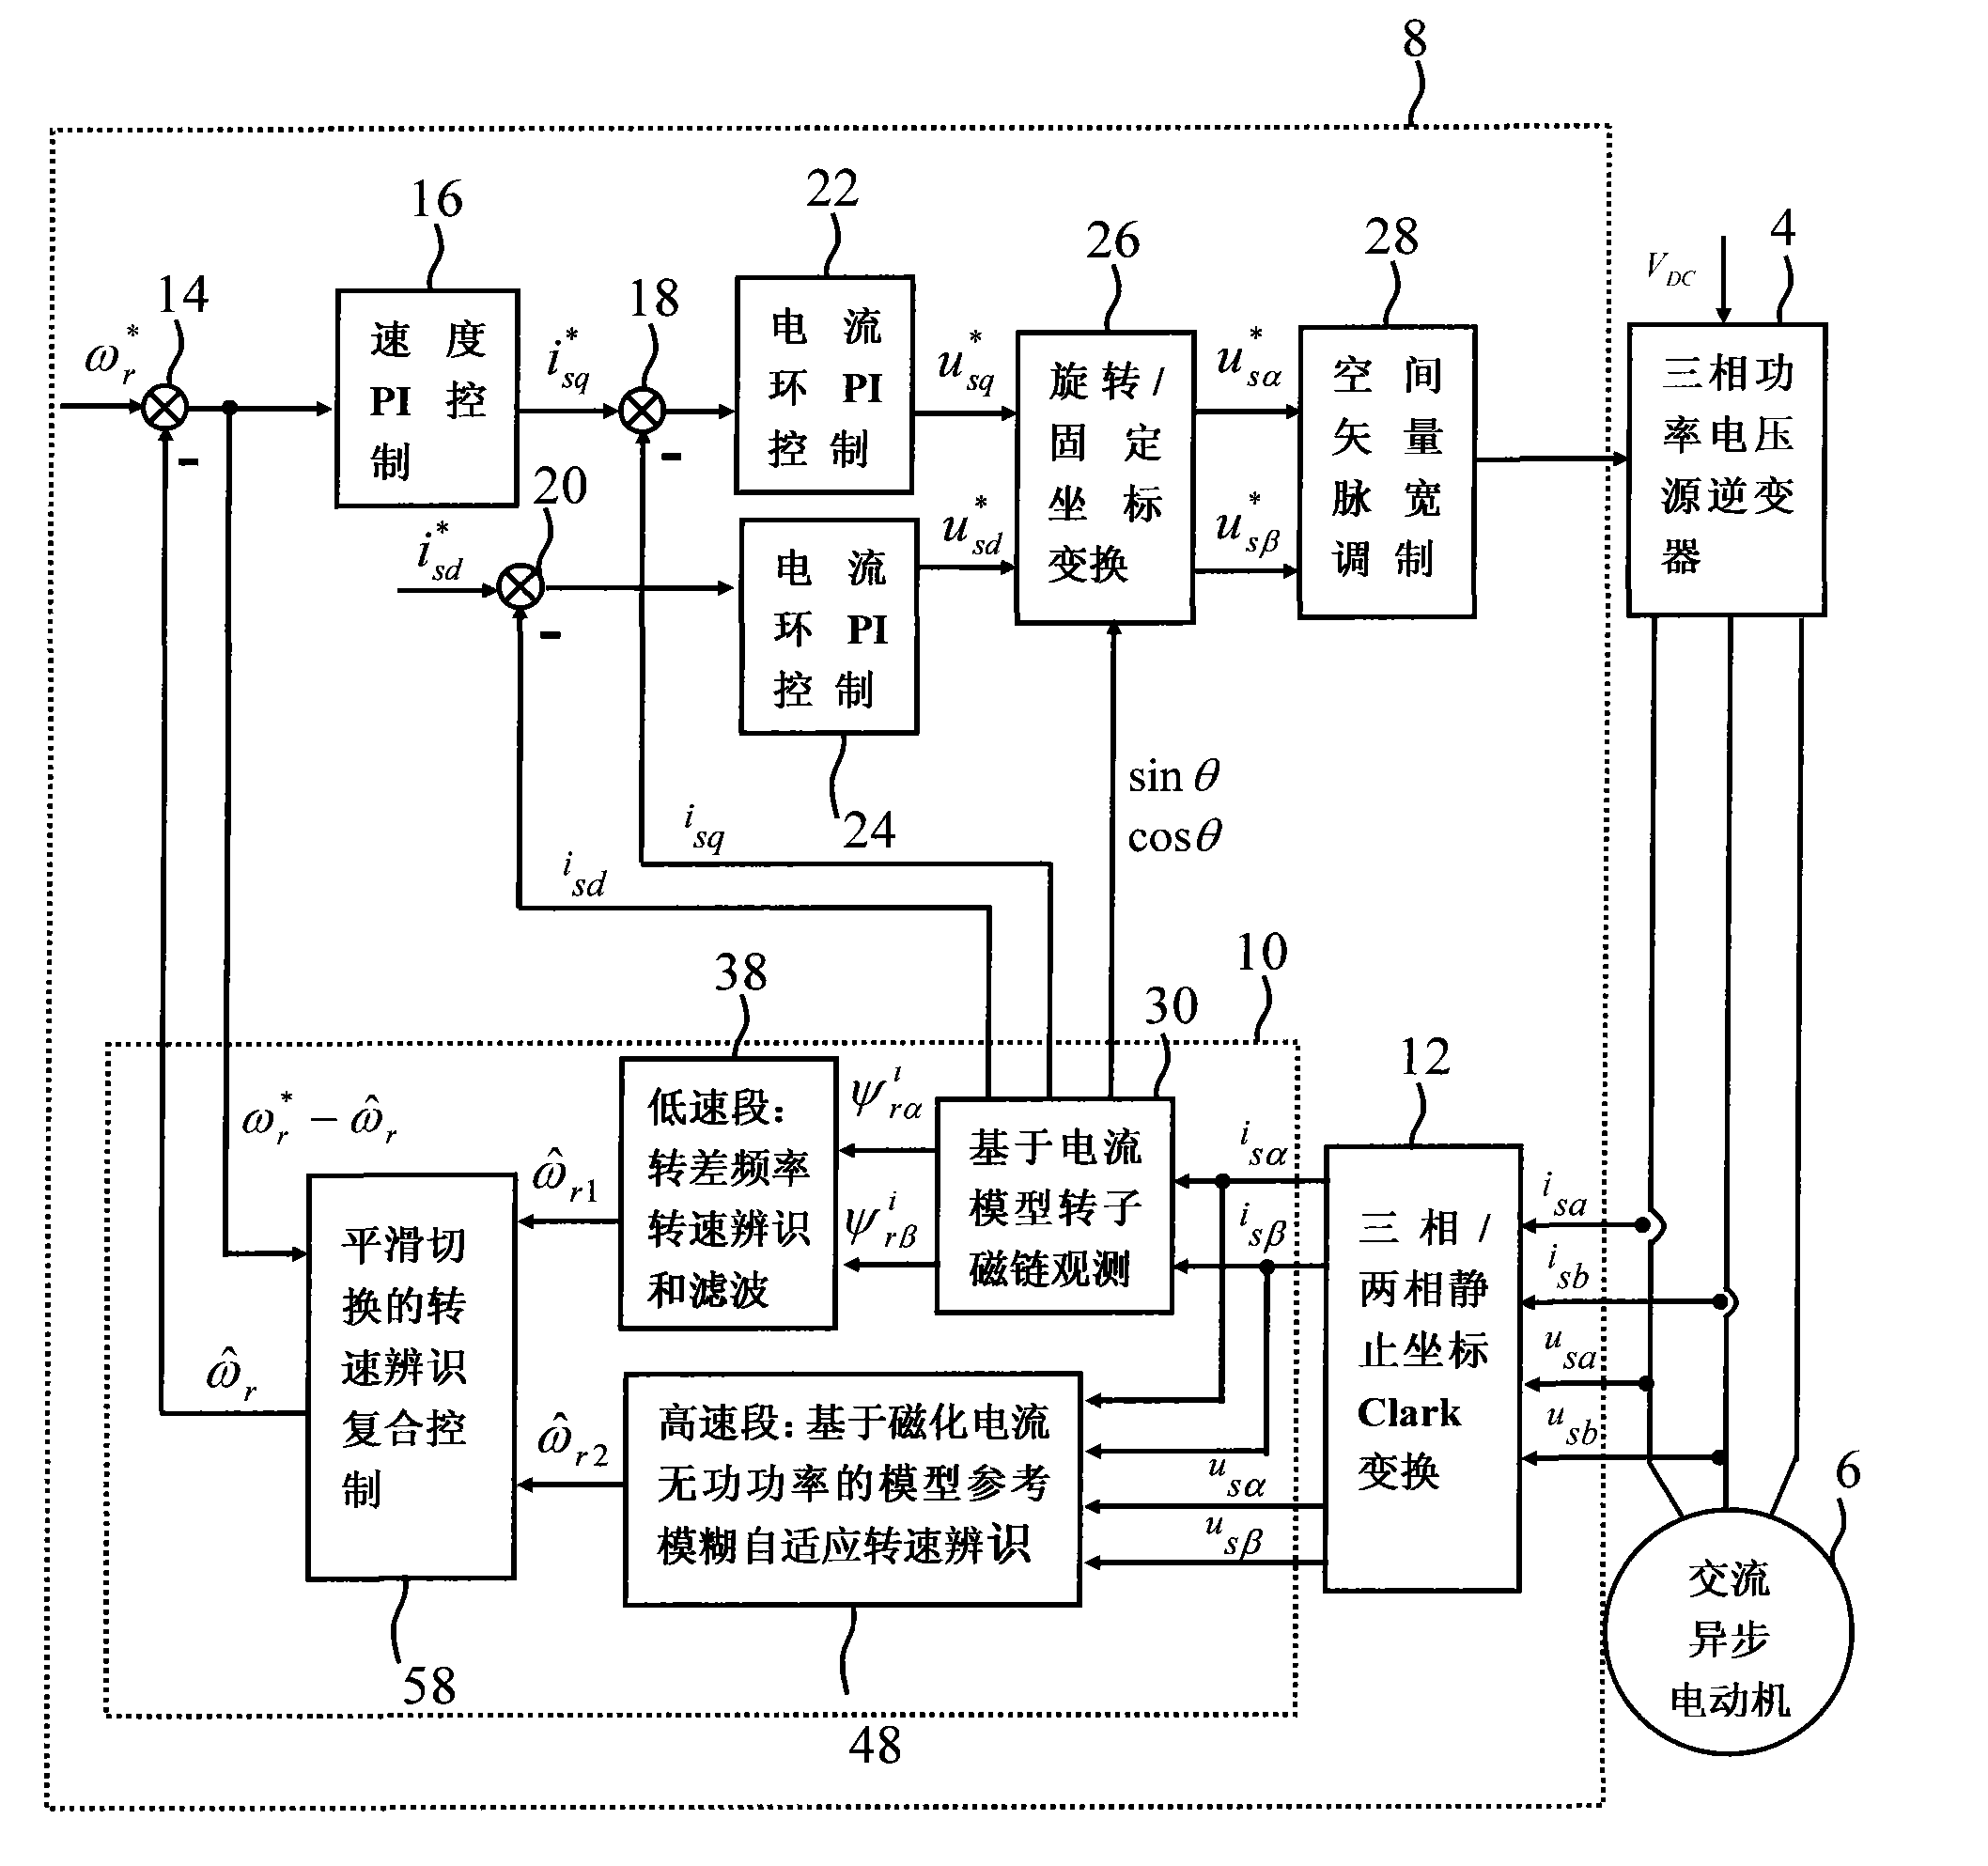 Motor non-speed sensor control method for smoothly switching composite rotating speed identification